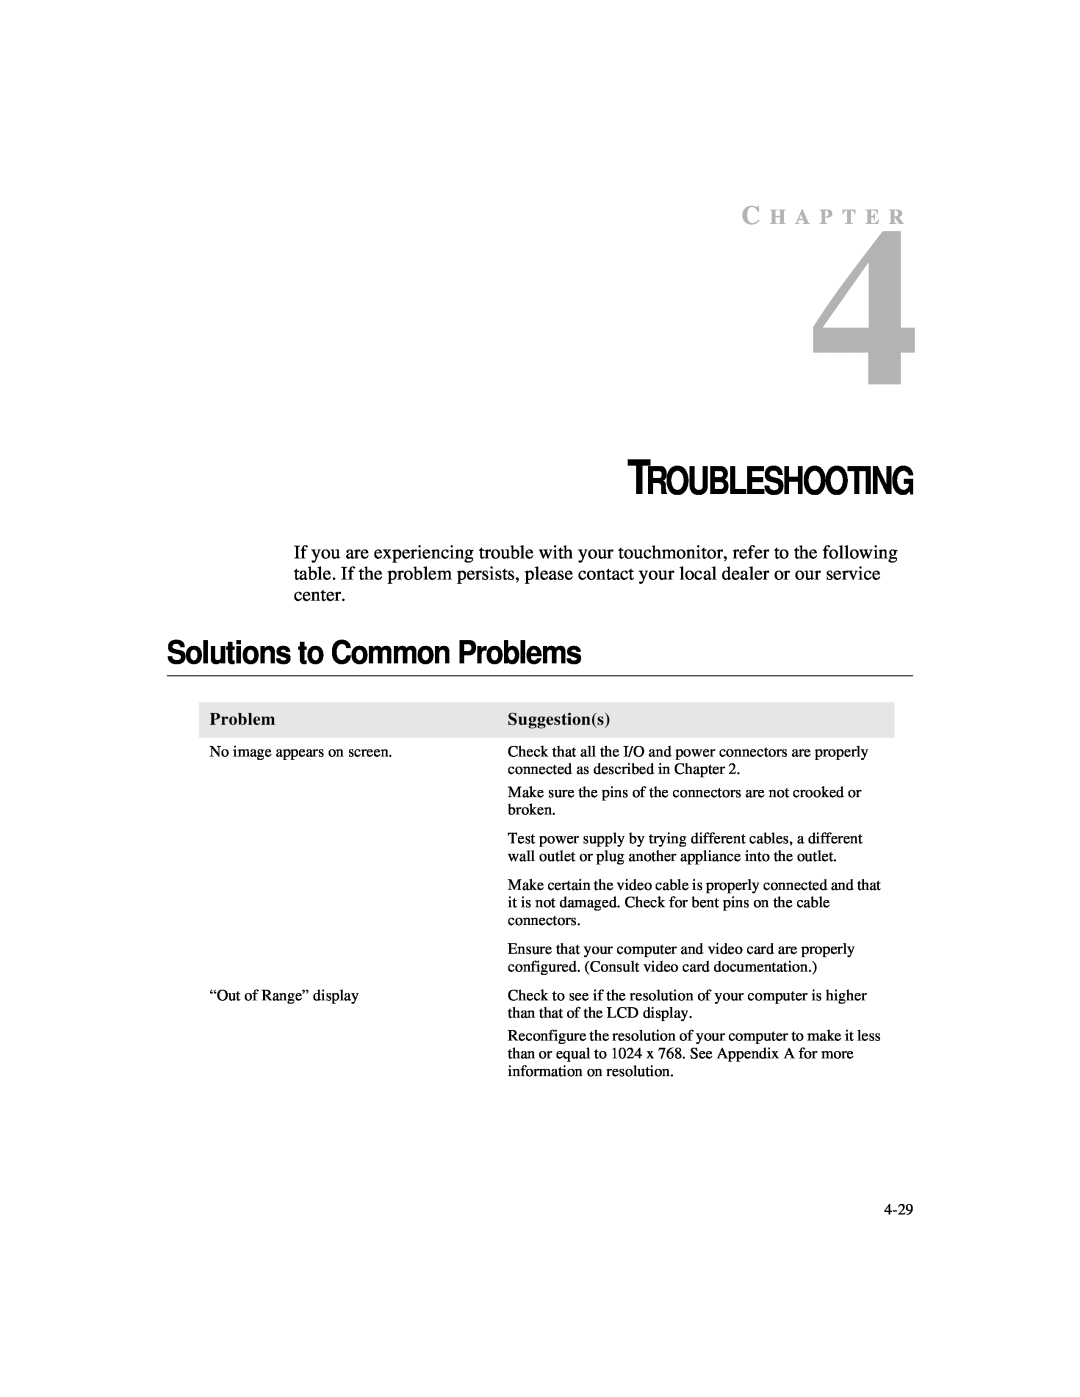 Elo TouchSystems 1525L manual Troubleshooting, Solutions to Common Problems, C H A P T E R, Suggestions 